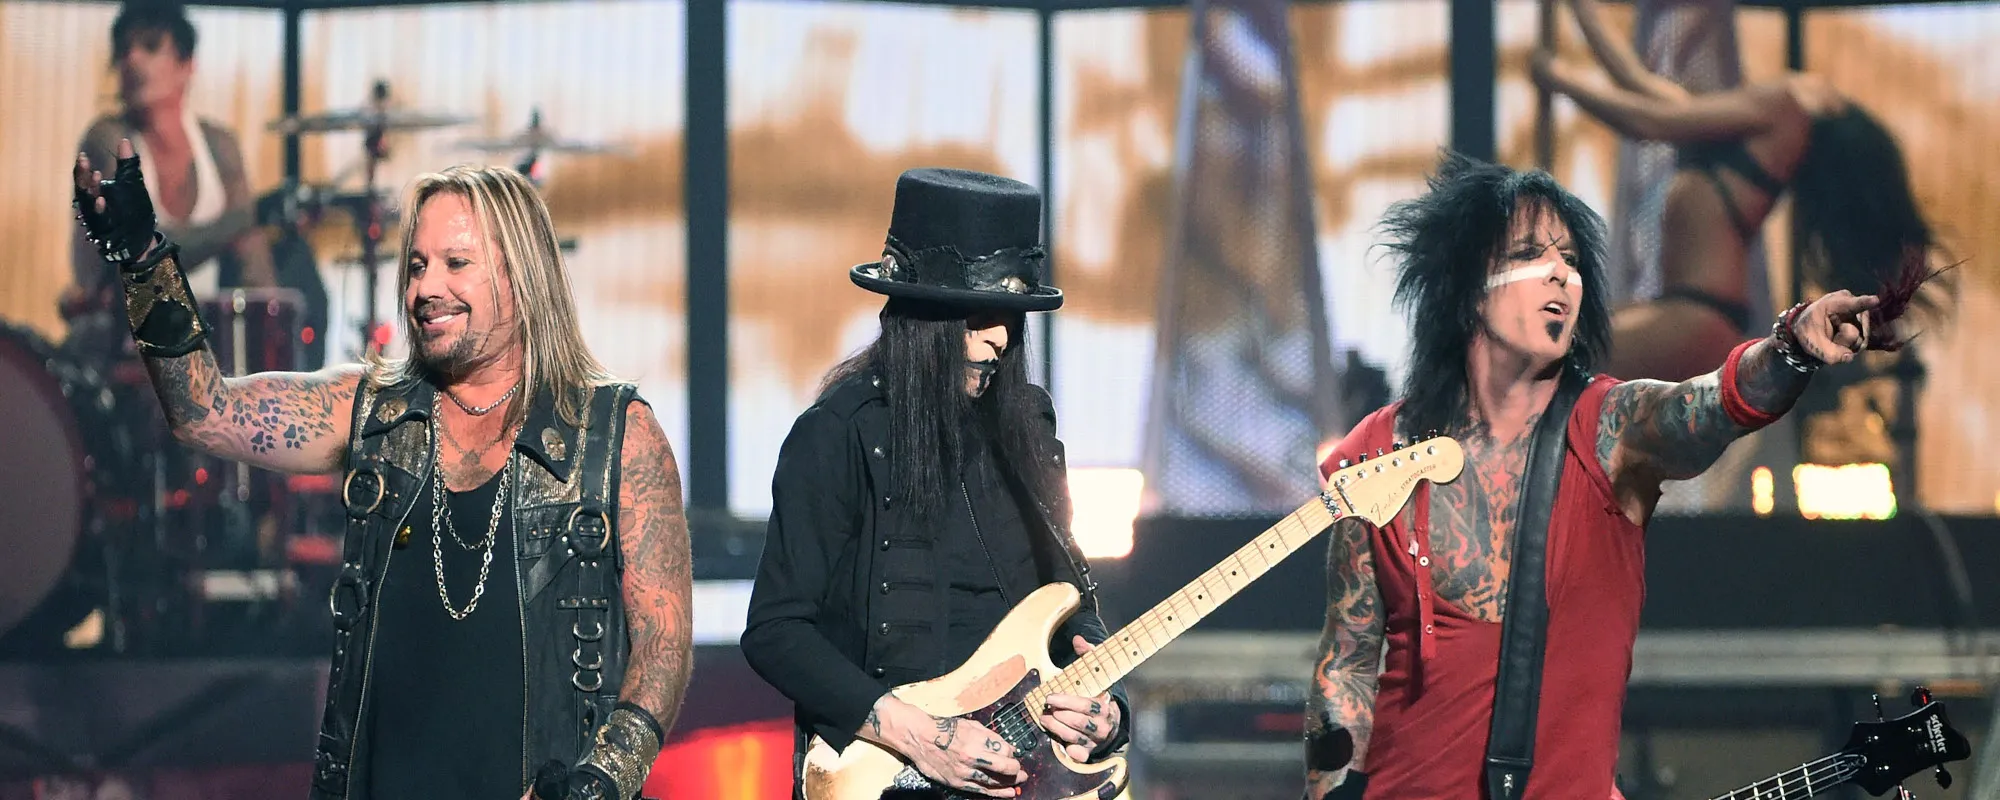 5 Reasons Why Mötley Crüe Makes for Glorious, Notorious Rock and Roll Legend